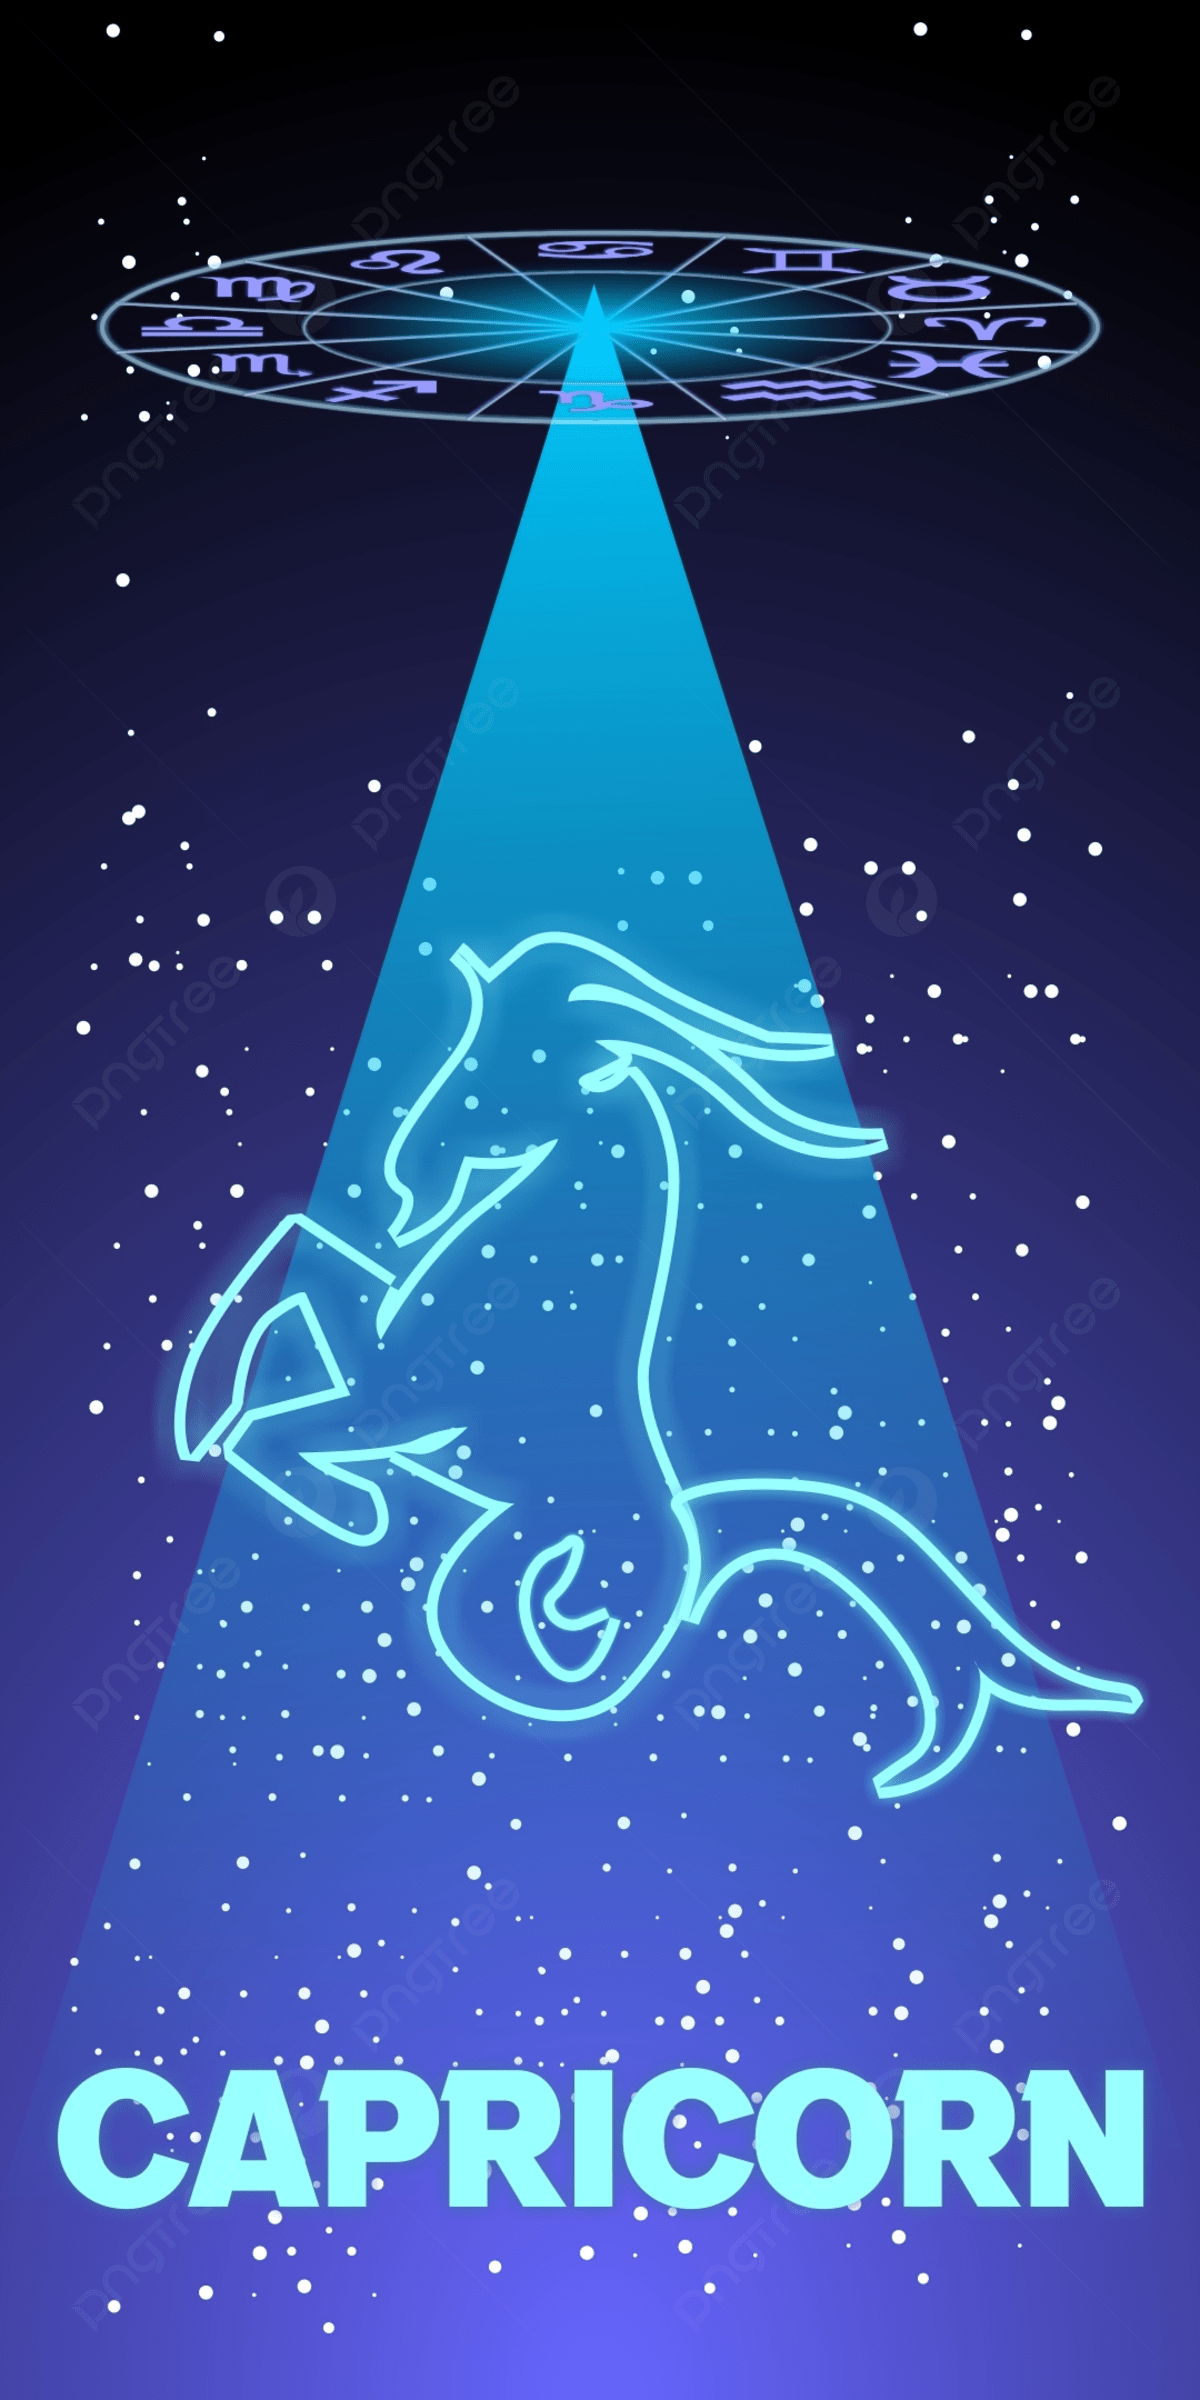 Capricorn zodiac sign on a dark blue background with stars and a flying saucer. - Capricorn